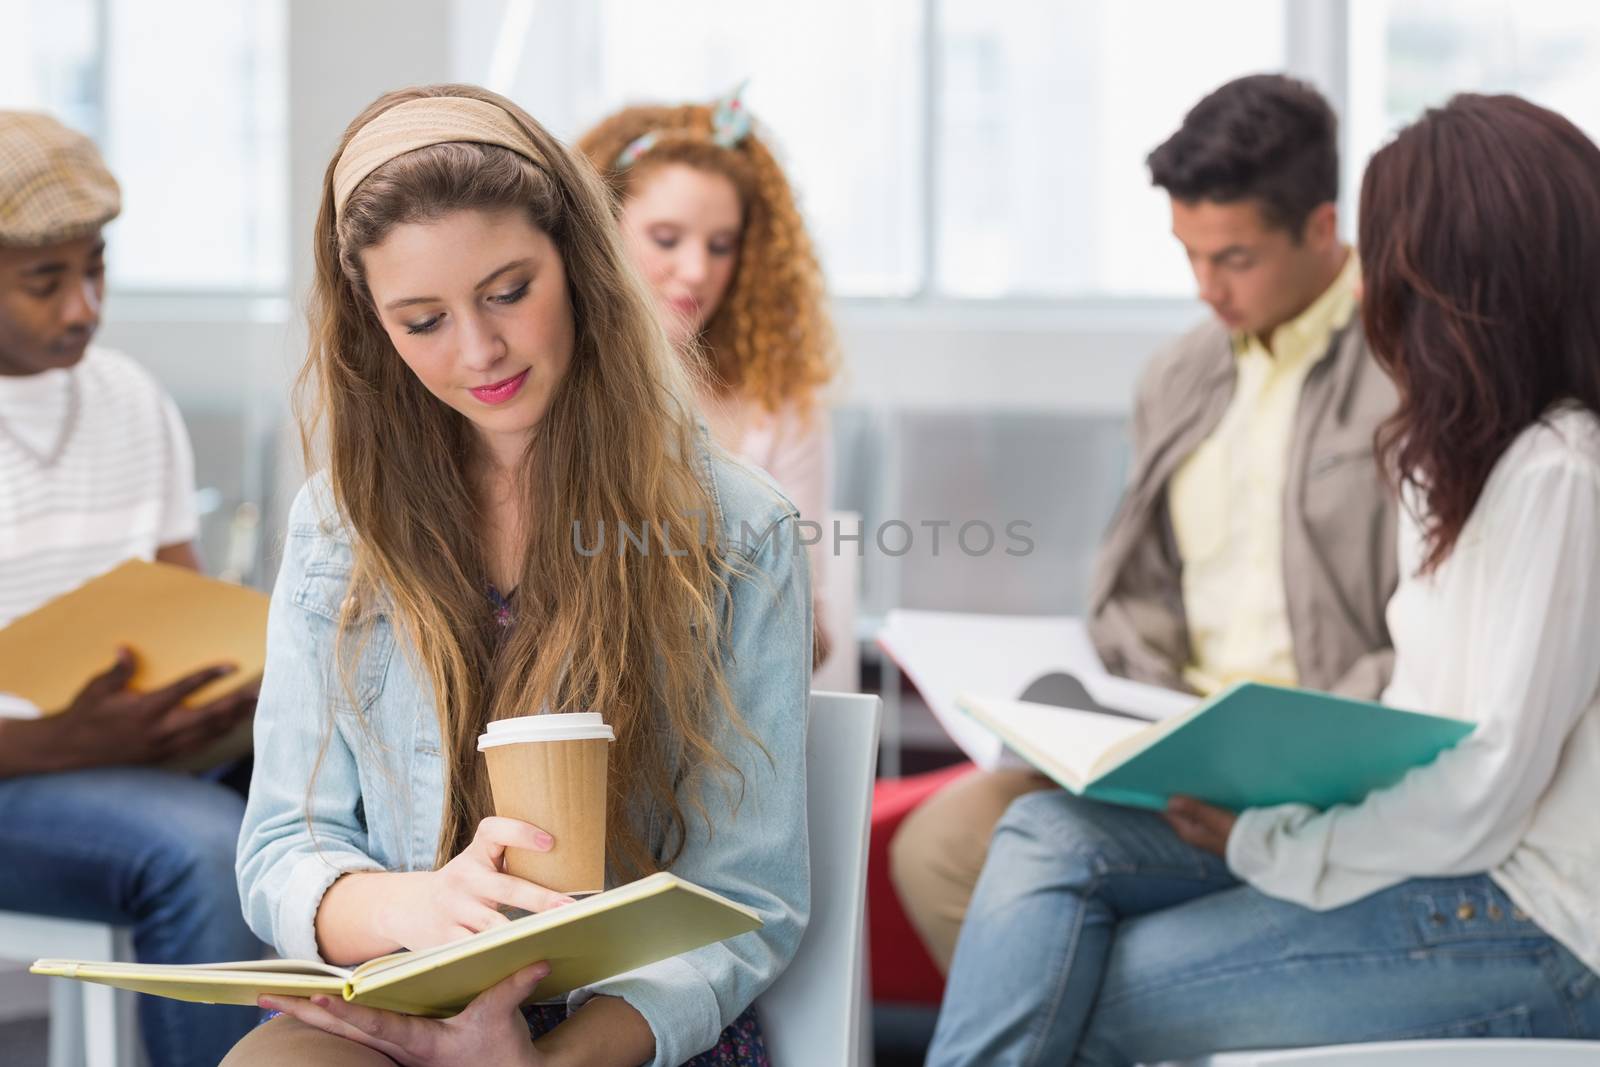 Fashion student reading her notes by Wavebreakmedia